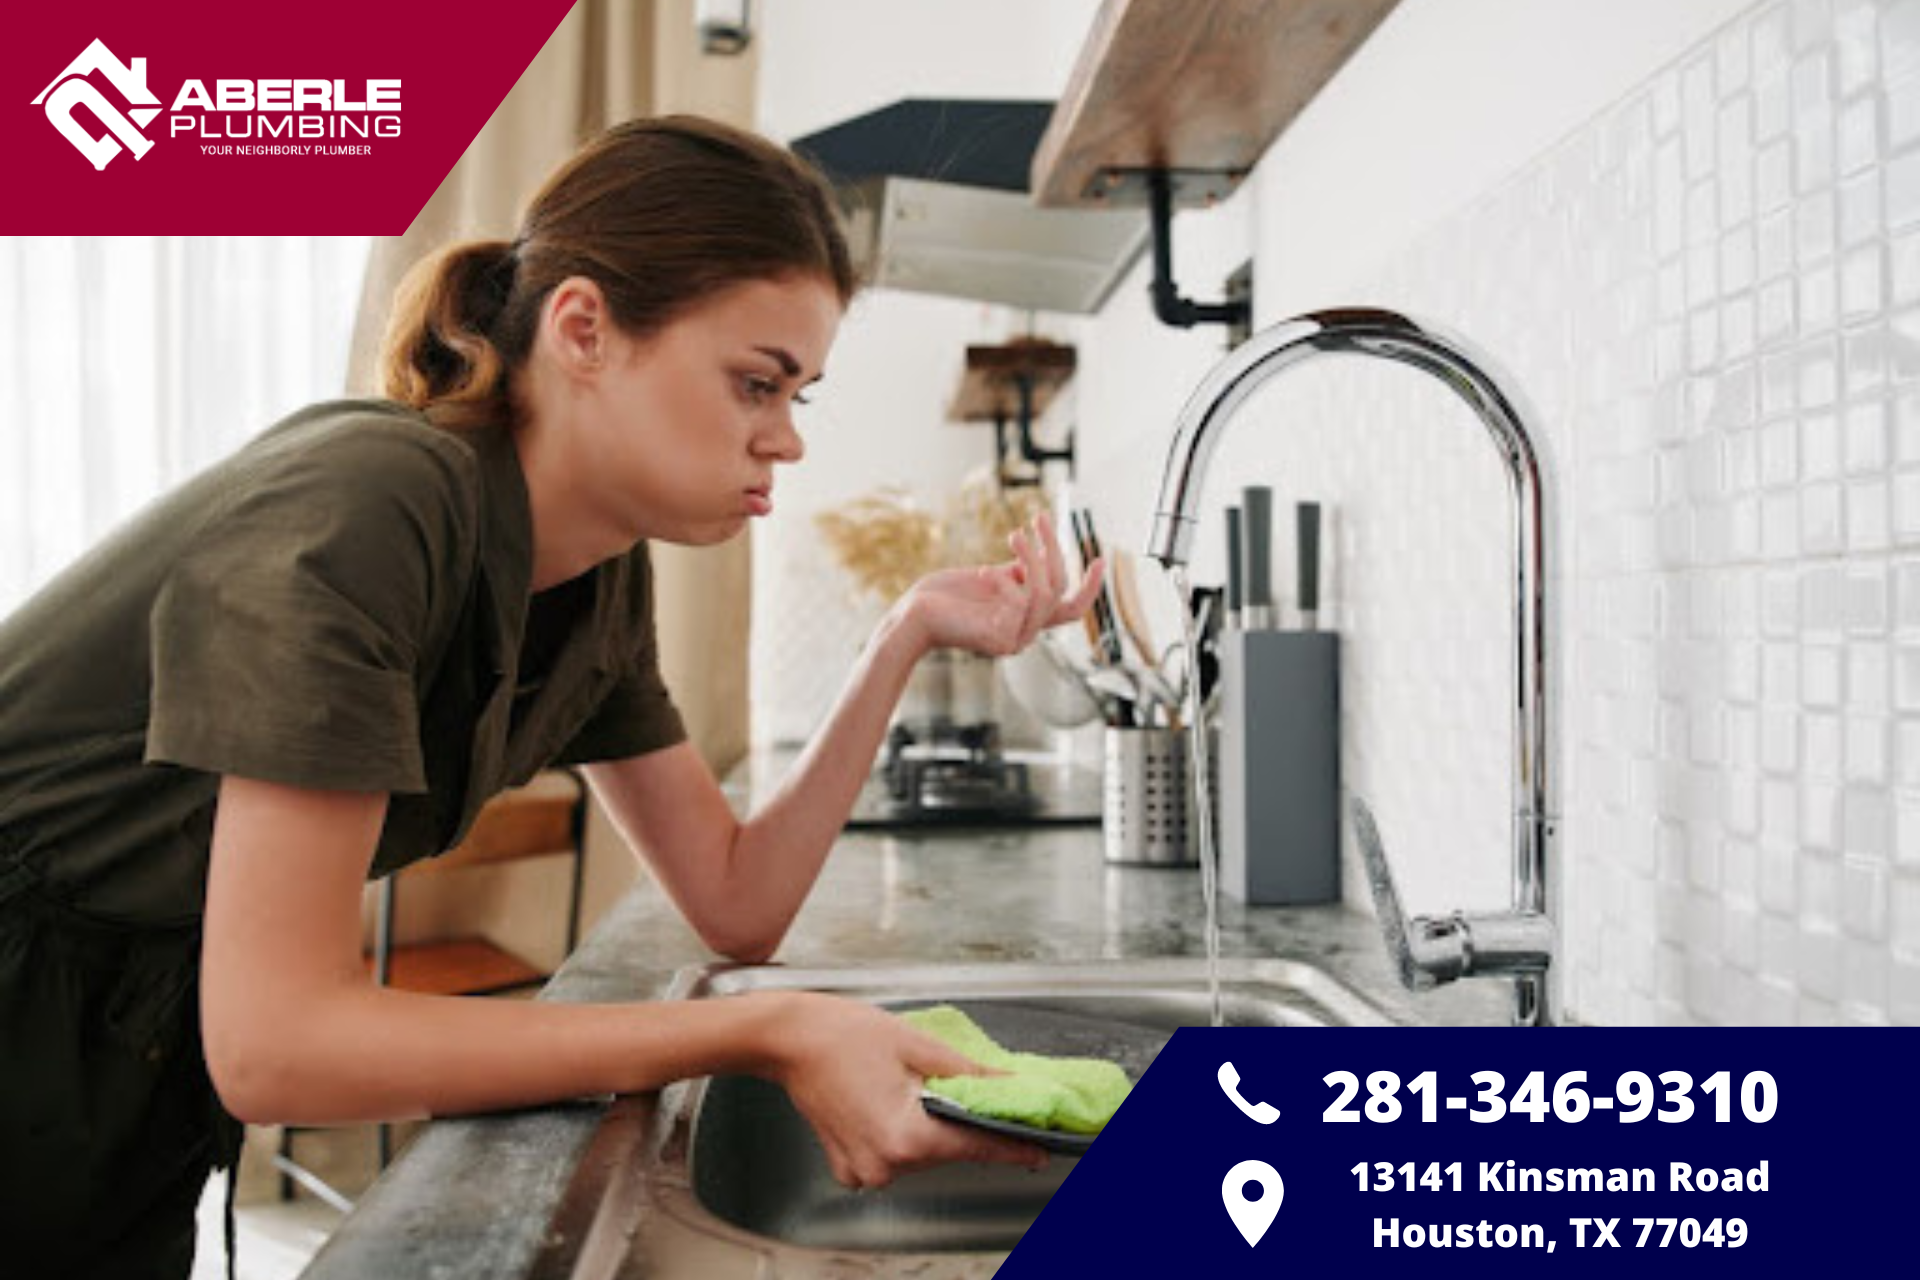 A woman looking at a faucet with low water pressure as she cleans a plate.